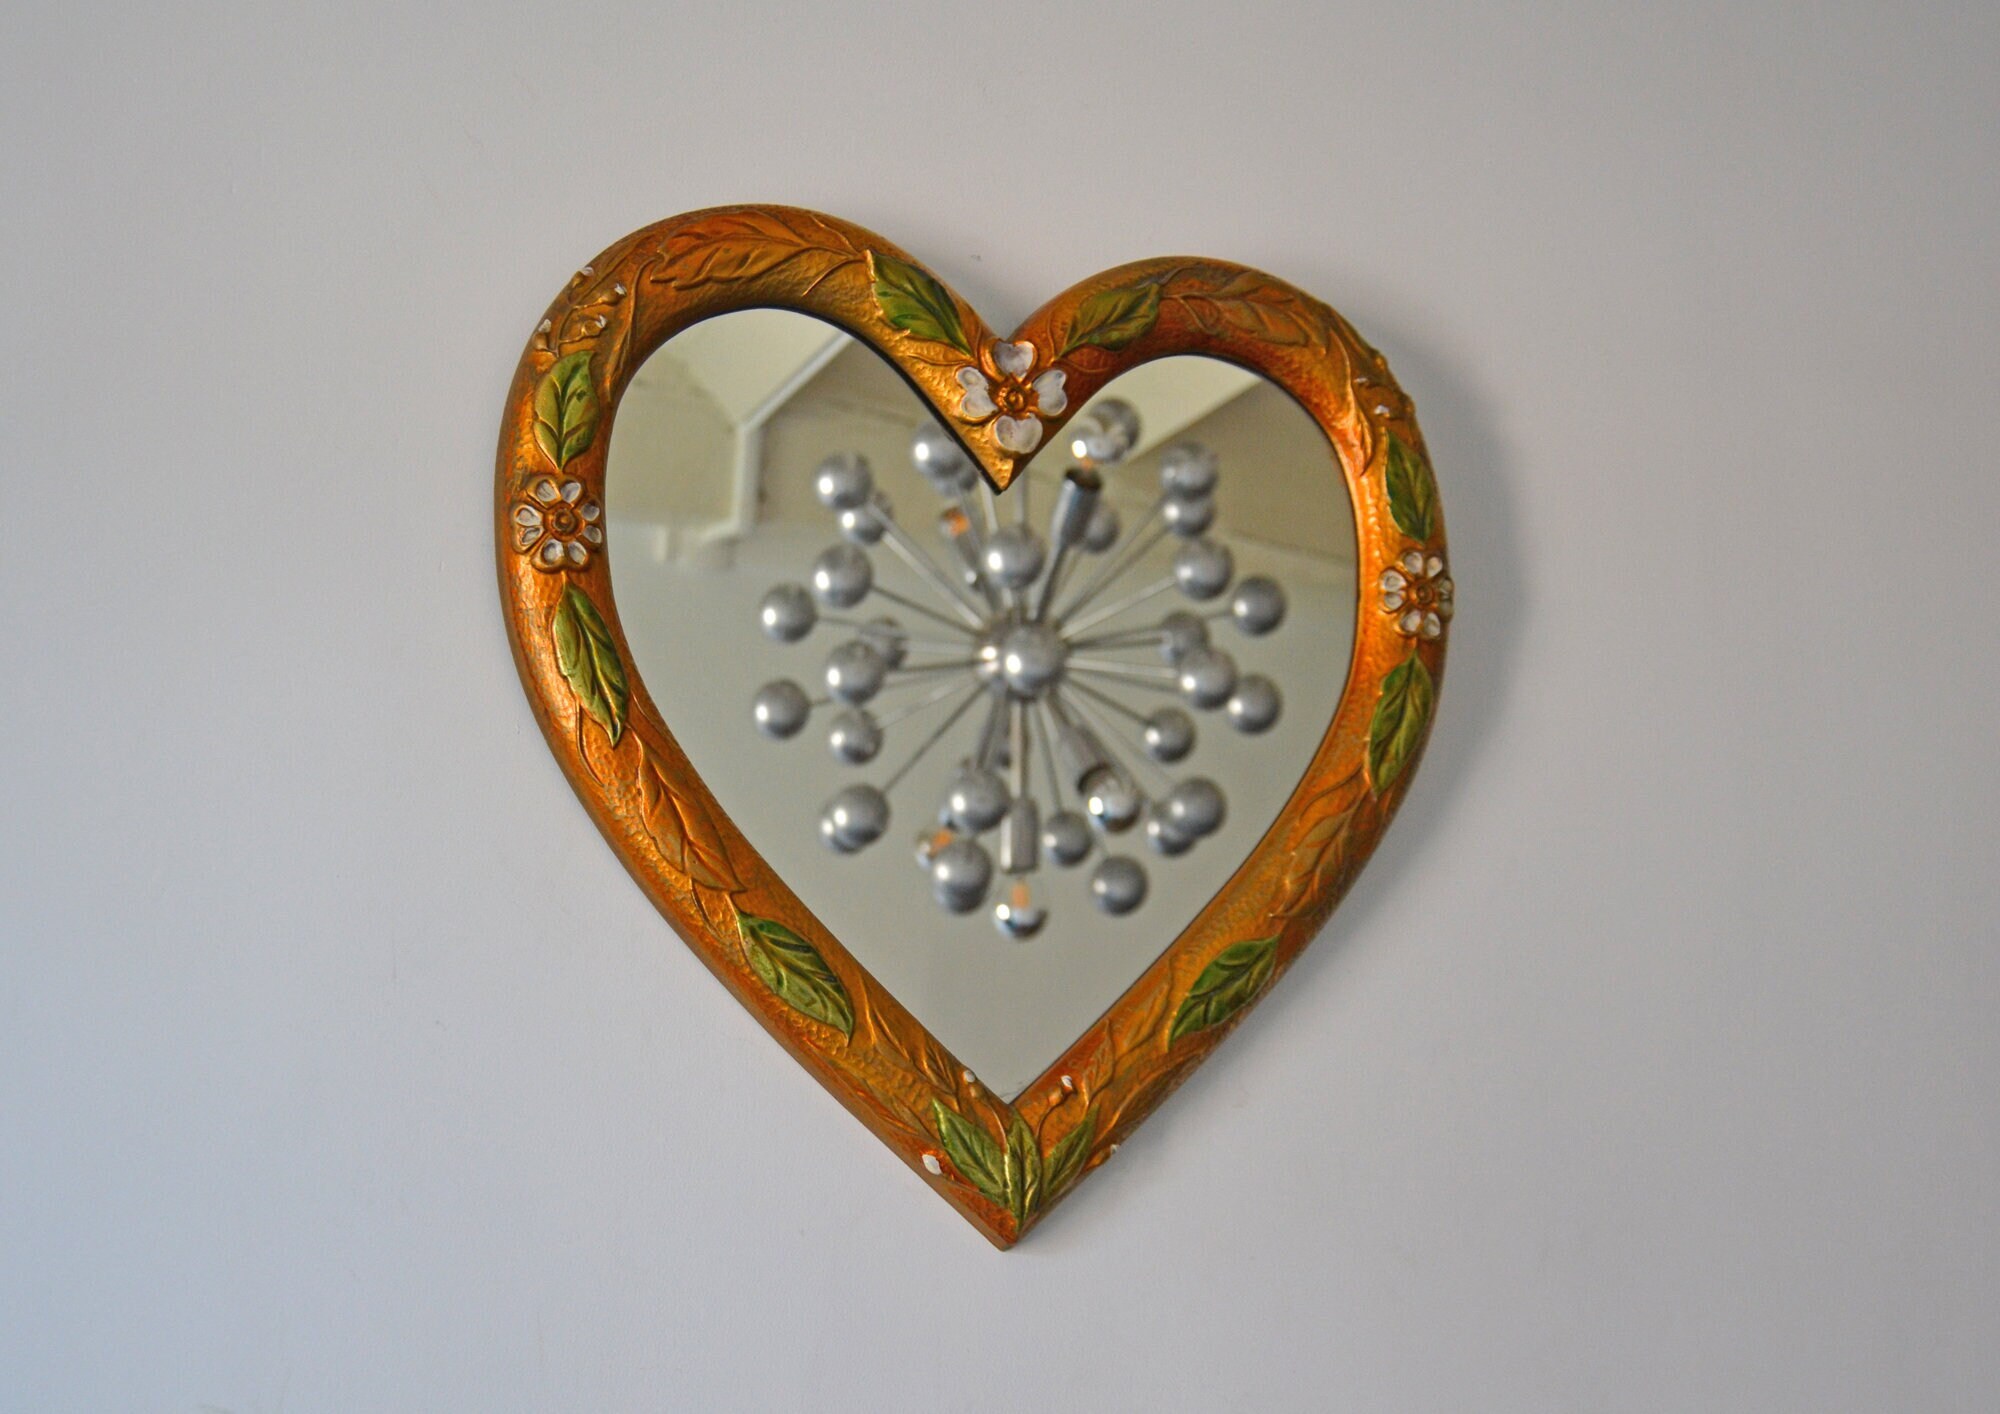 Vintage Mirror - White Wicker Heart Shaped County Chic 18” x17” Cute